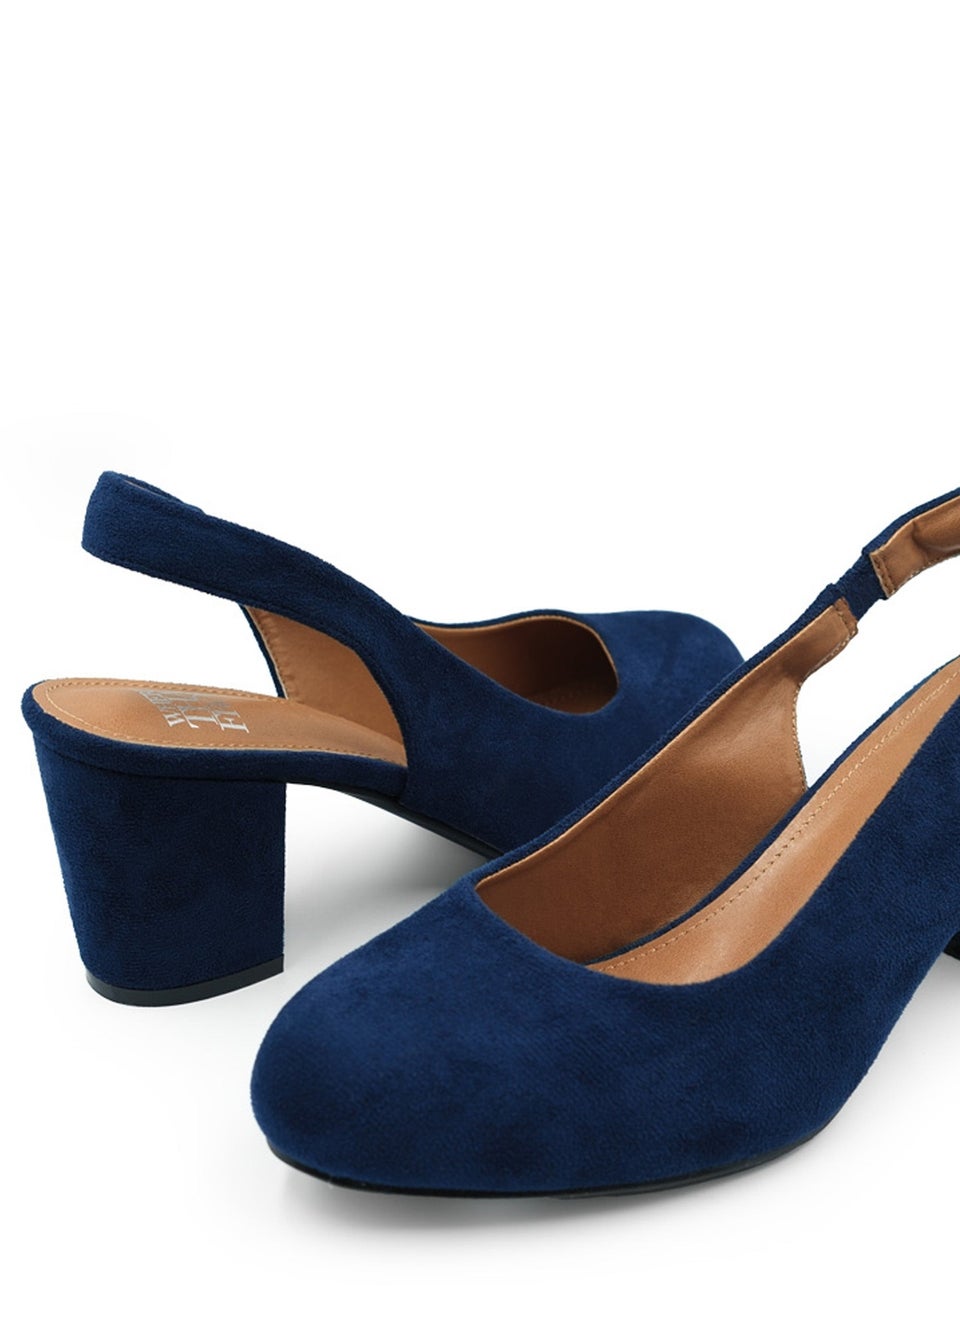 Where's That From Navy Suede Edith Block Heel Slingback Shoes